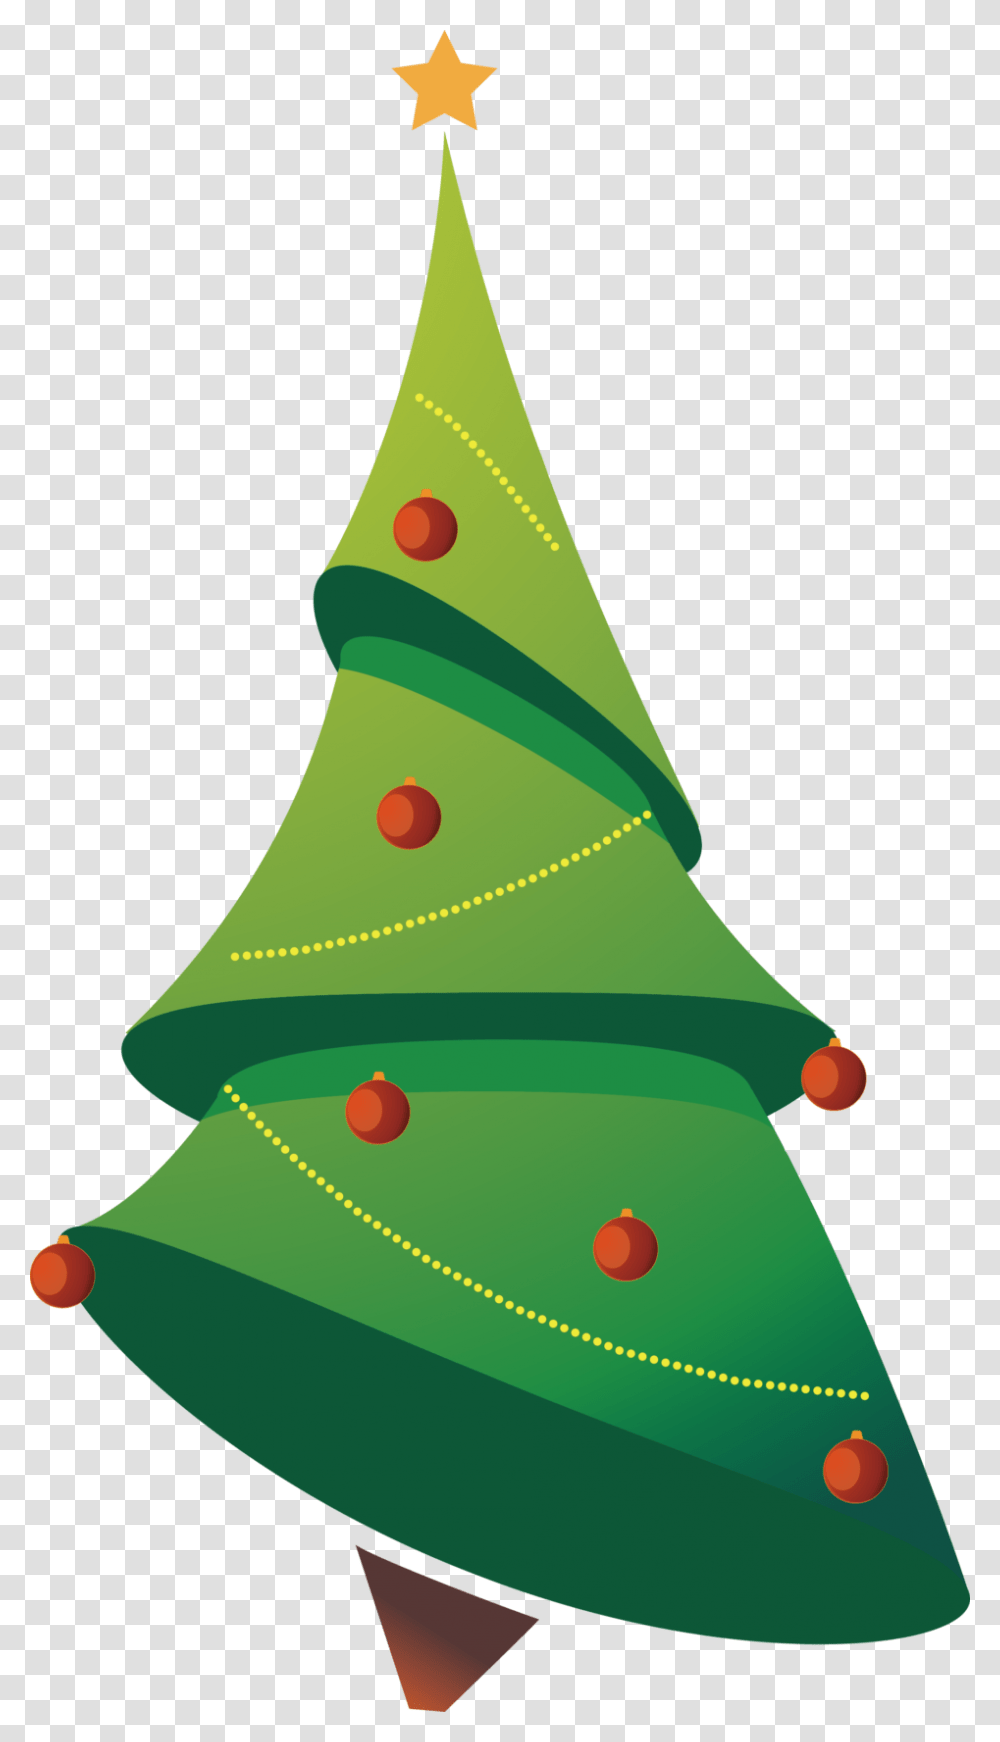 Christmas Tree Vector Remarkable Christmas Tree Vector, Plant, Ornament, Triangle, Star Symbol Transparent Png